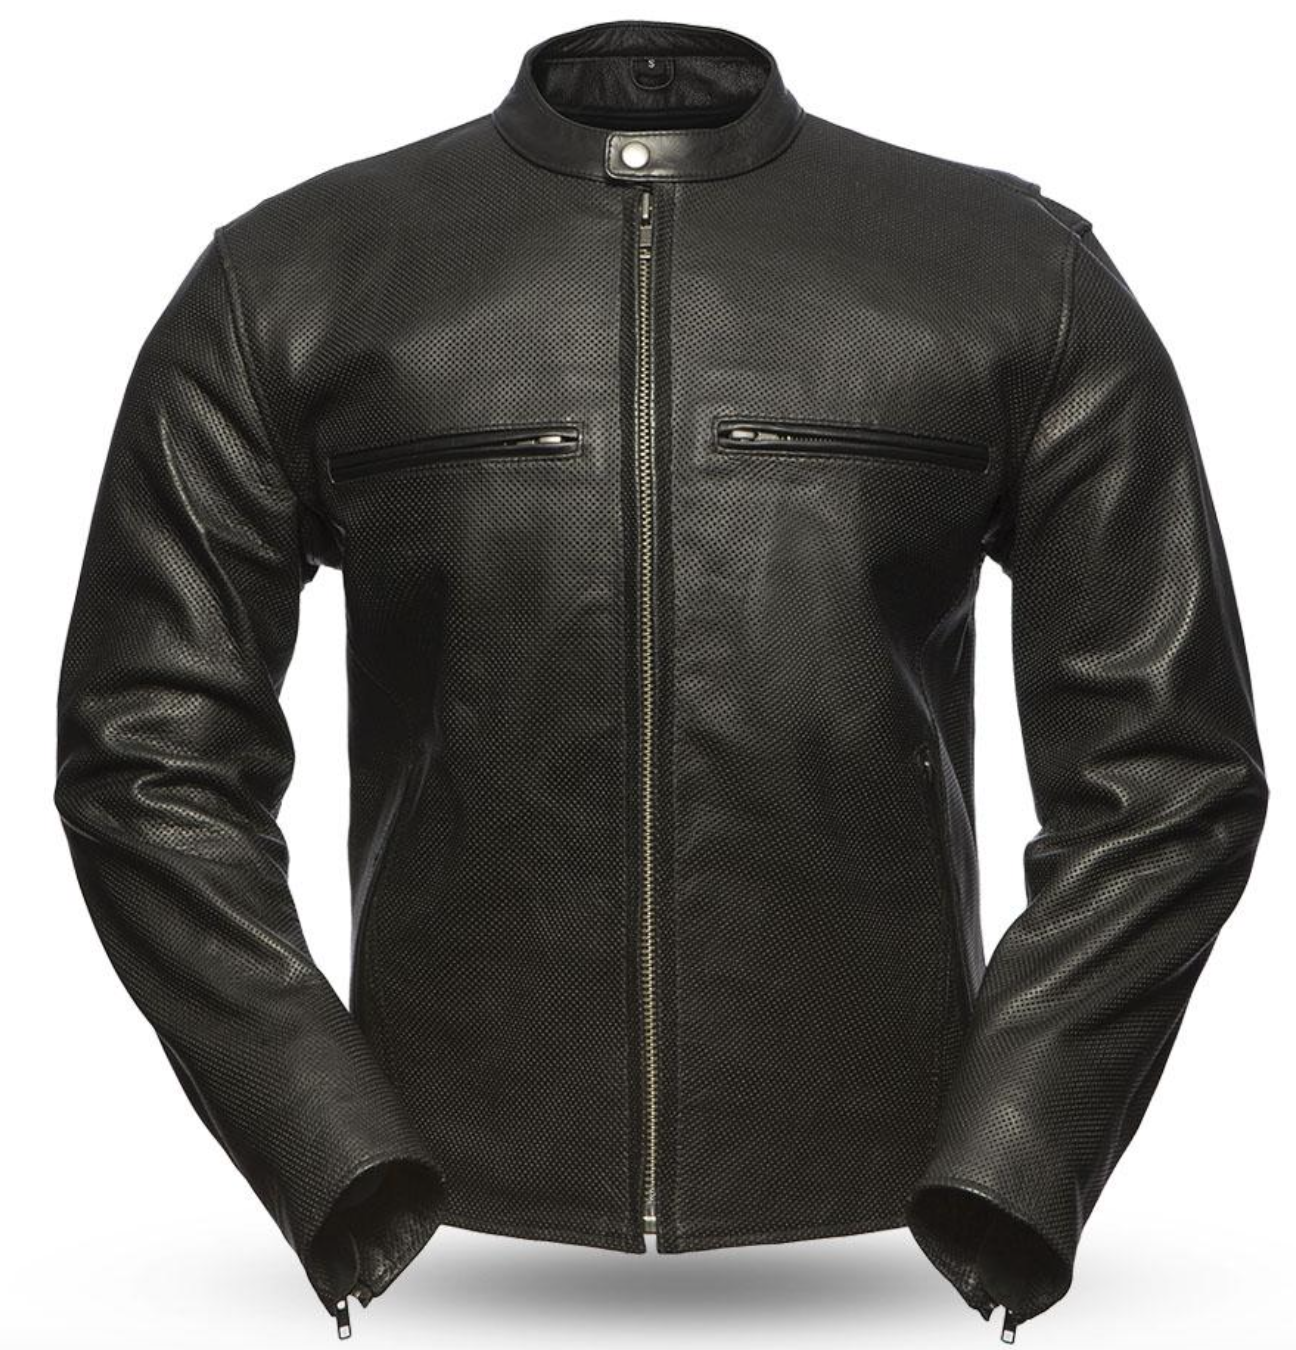 Turbine - Men's Perforated Leather Motorcycle Jacket